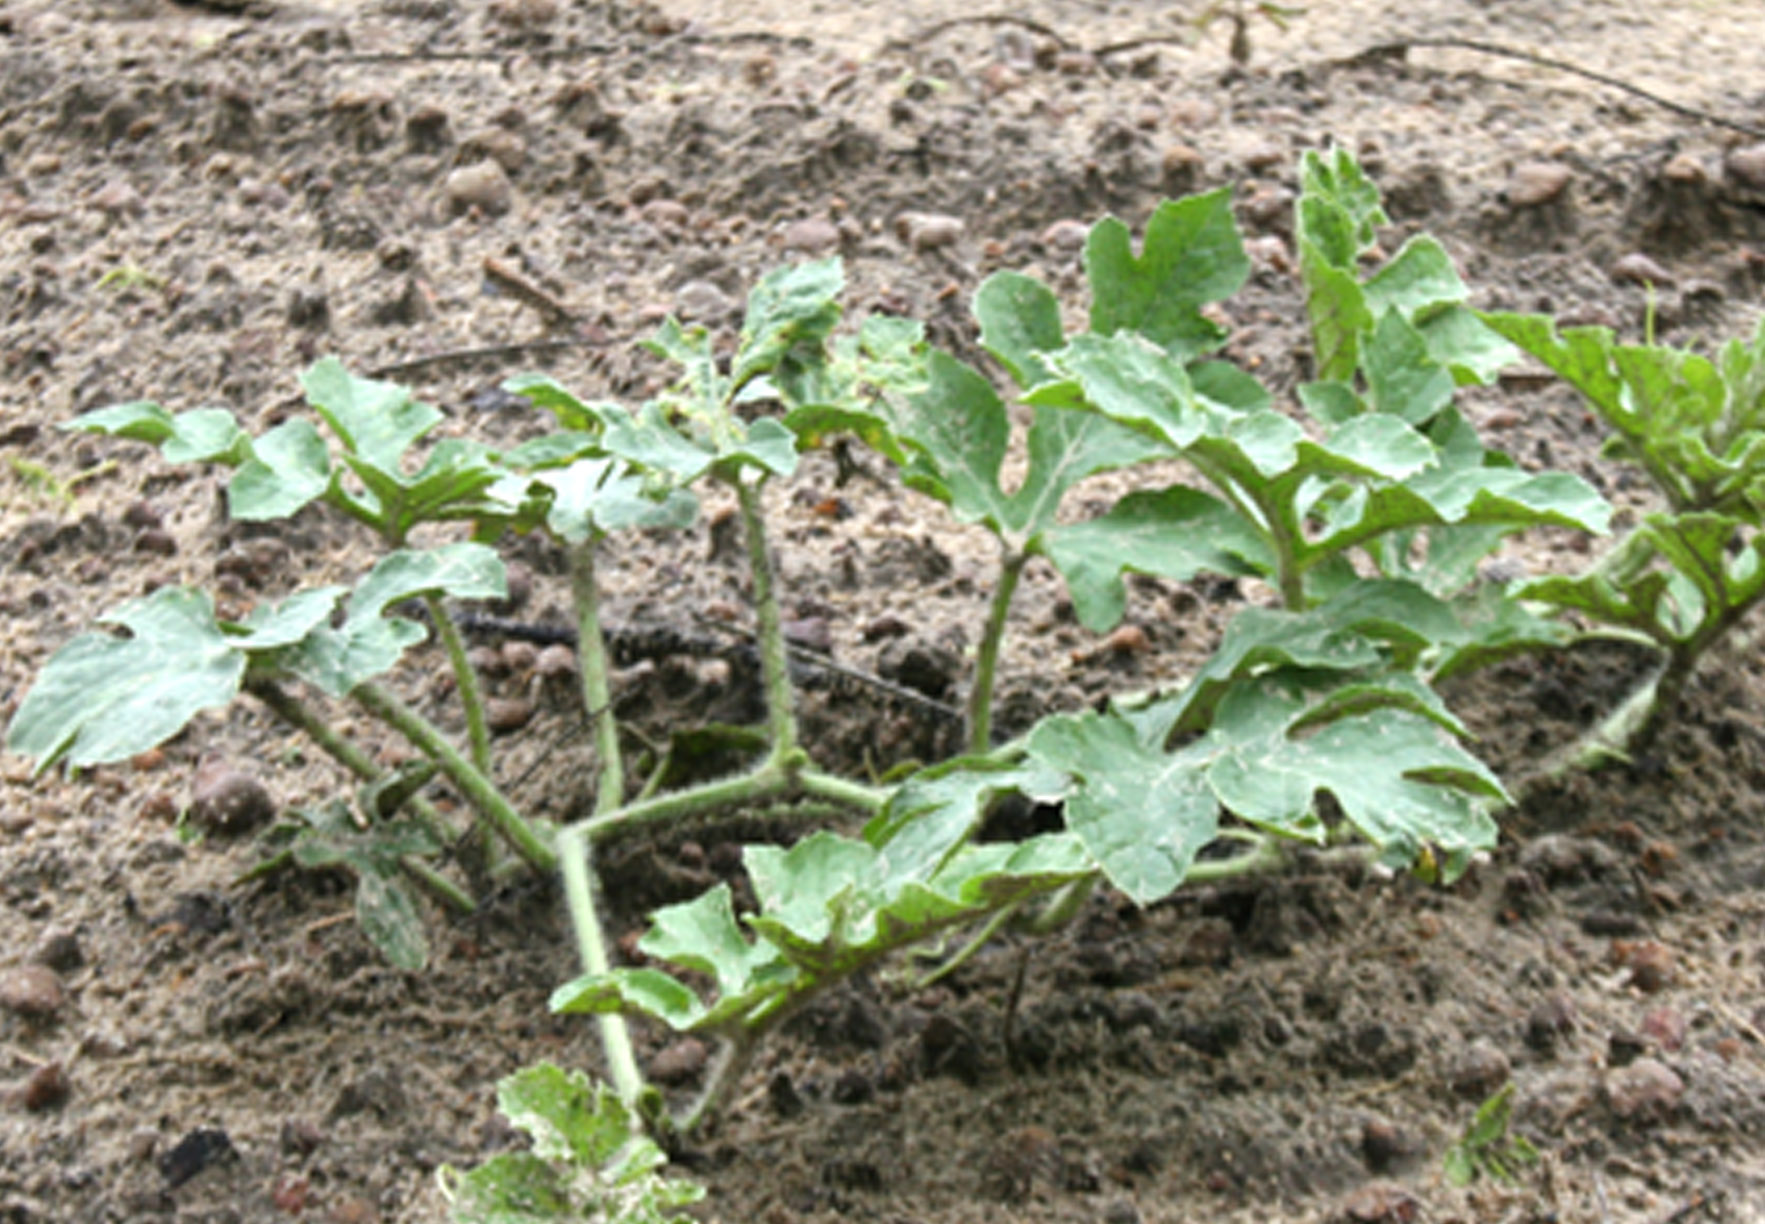 A watermelon plant is pictured in a field in Ty Ty, Ga. on Wednesday, April 30. The plant was planted on March 28.